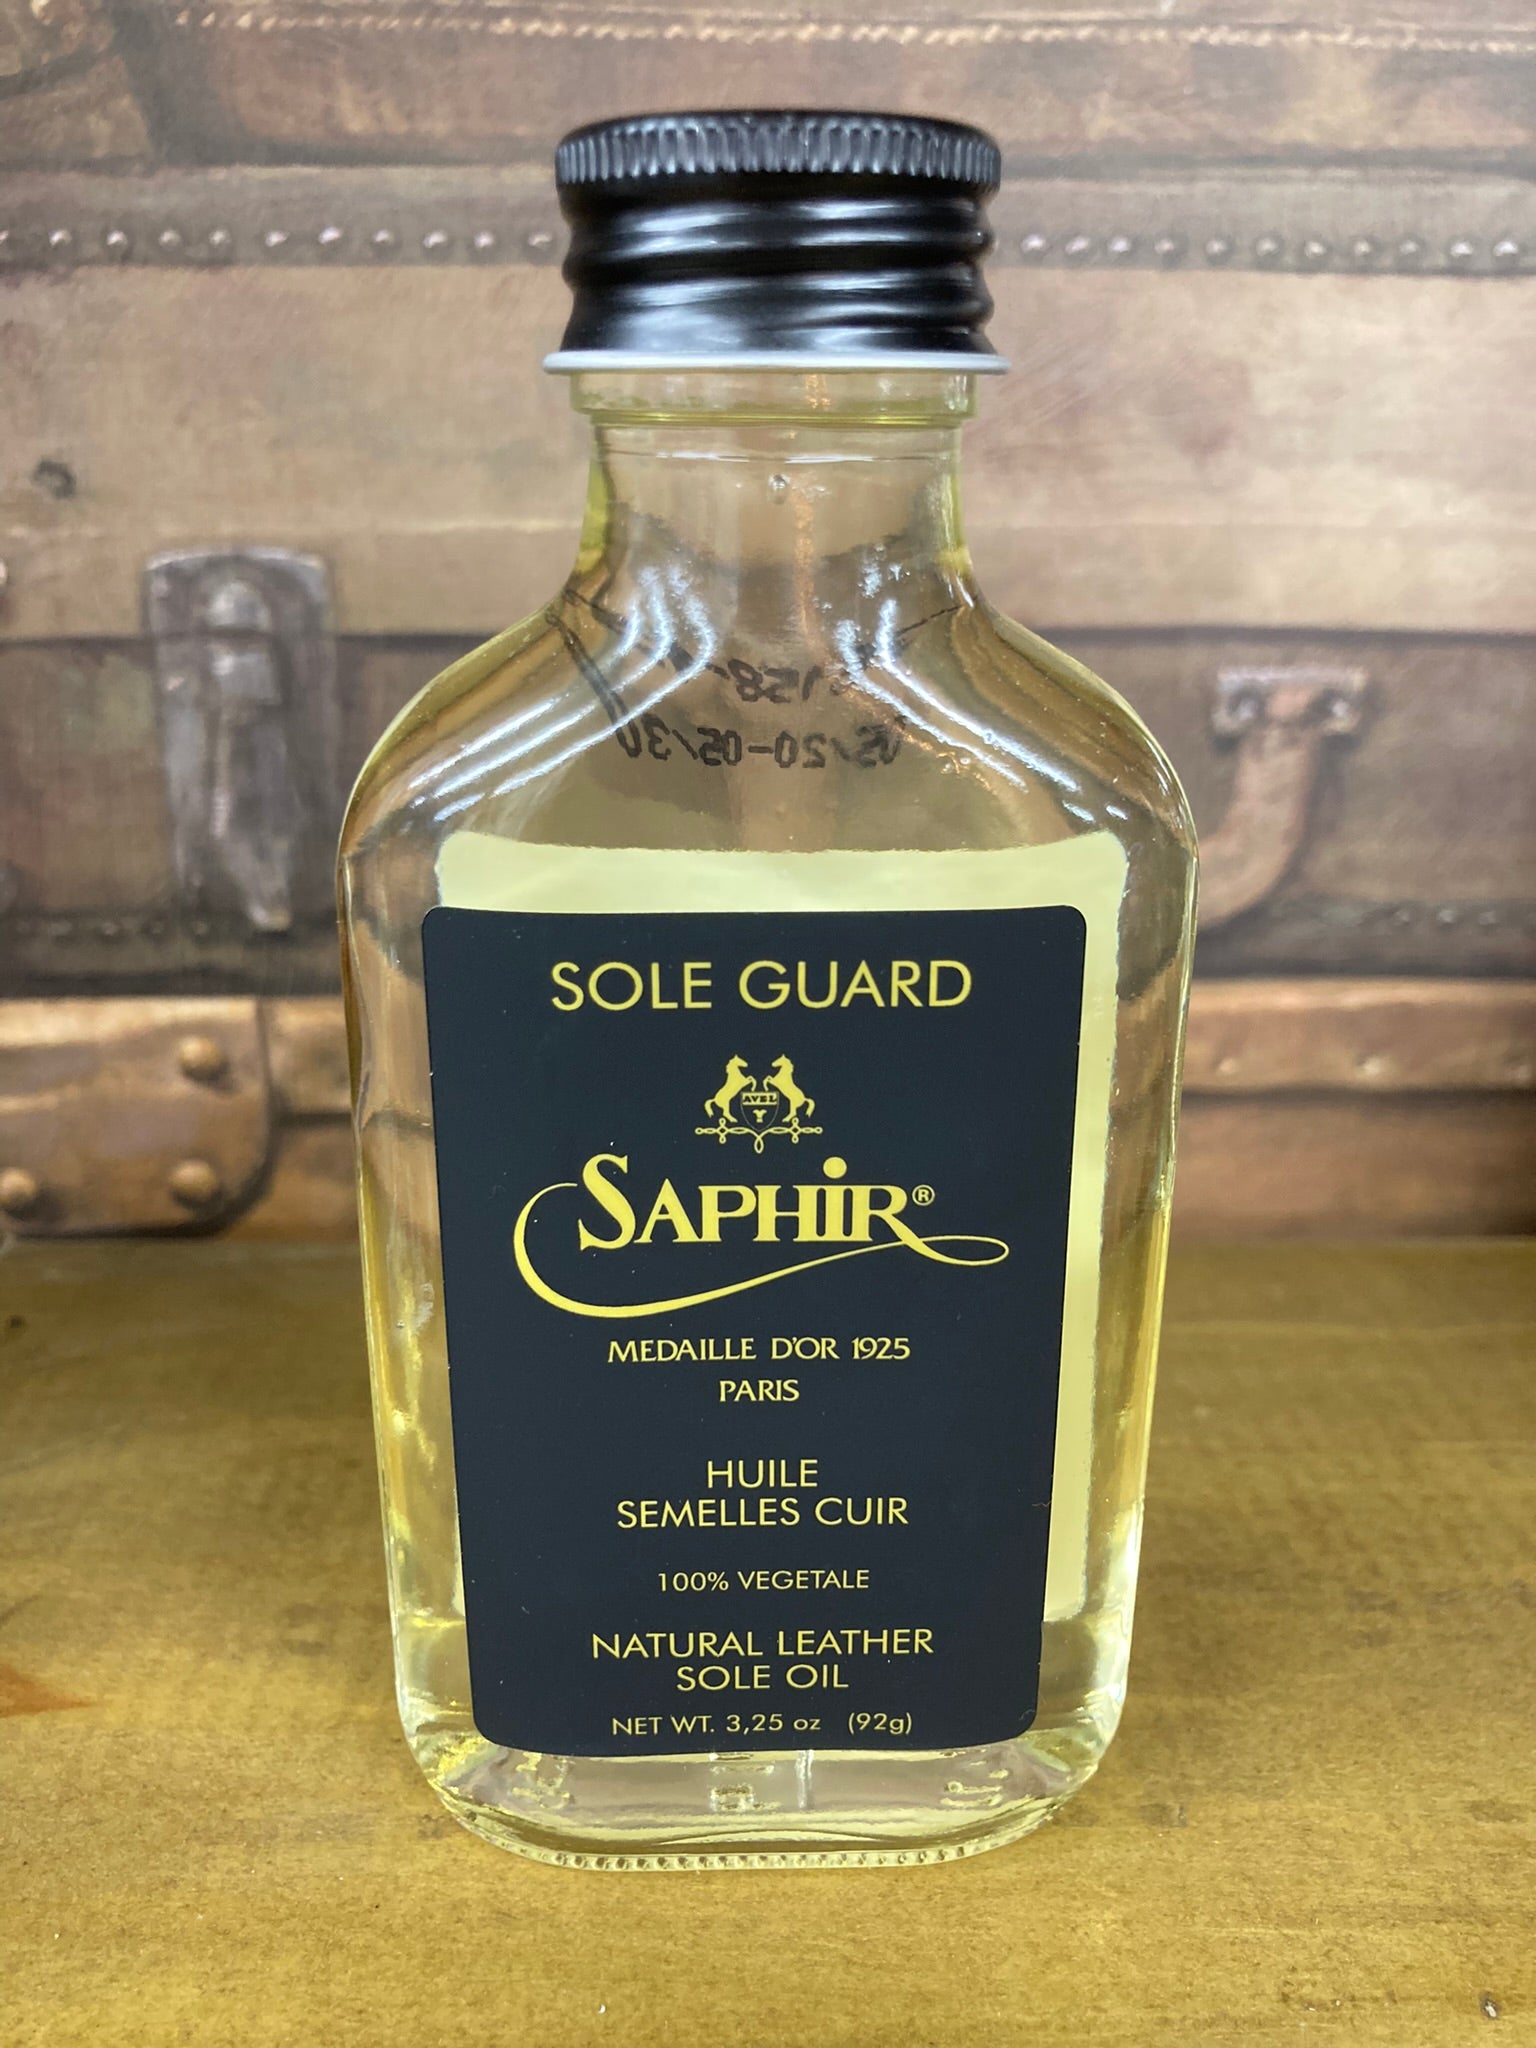 Saphir sole guard natural leather sole oil